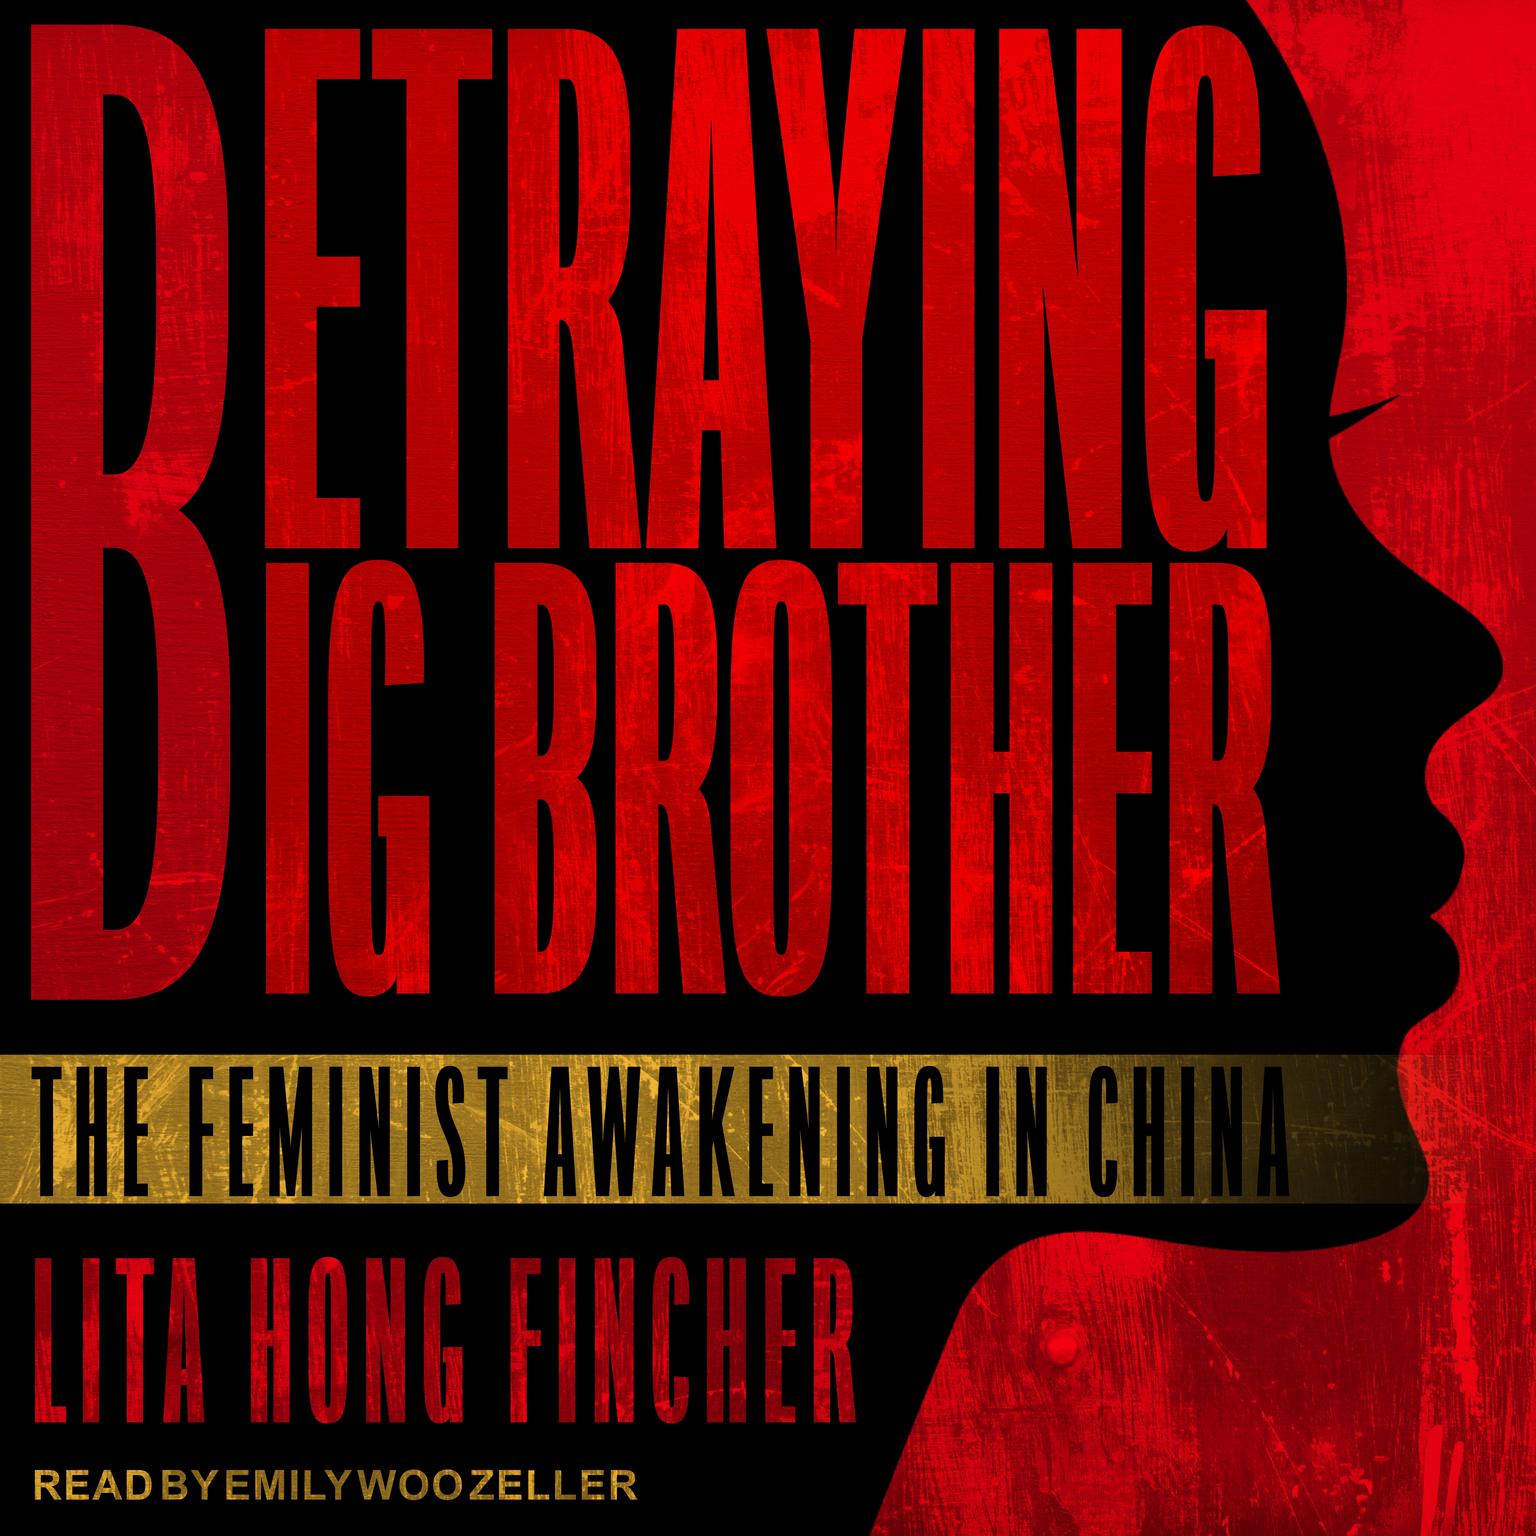 Betraying Big Brother: The Feminist Awakening in China Audiobook, by Leta Hong Fincher